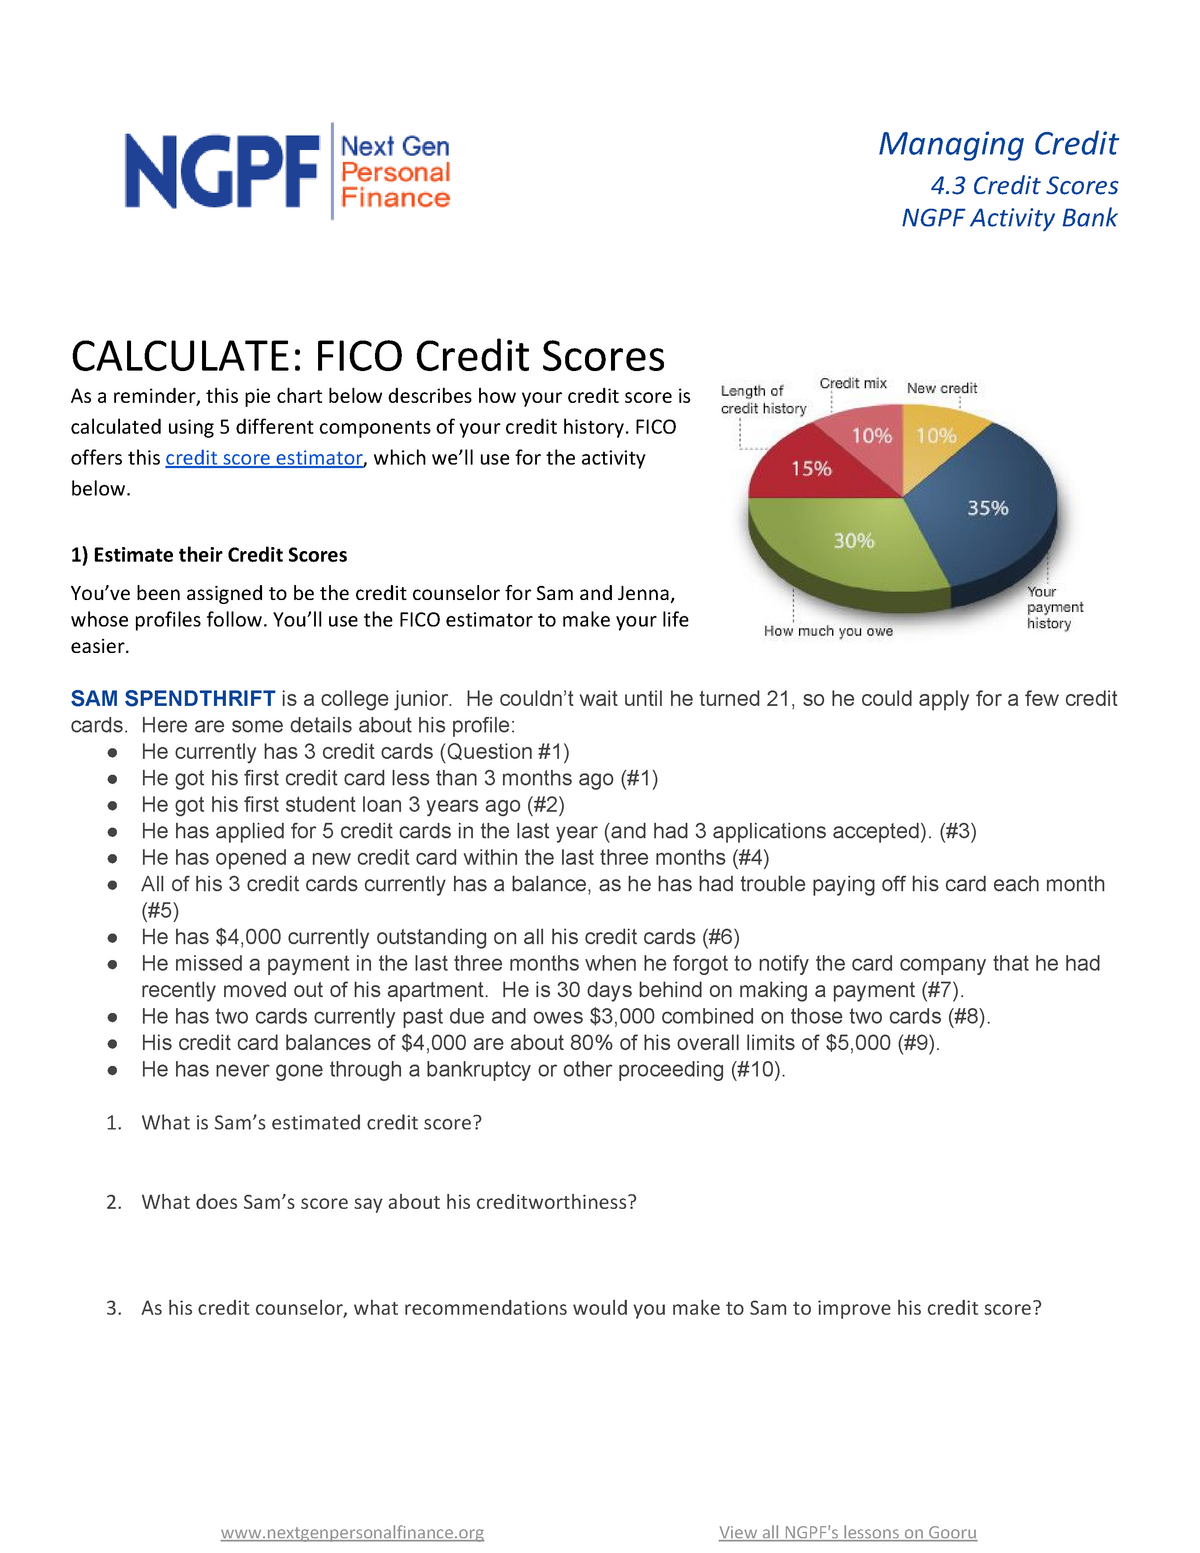 ngpf case study types of credit